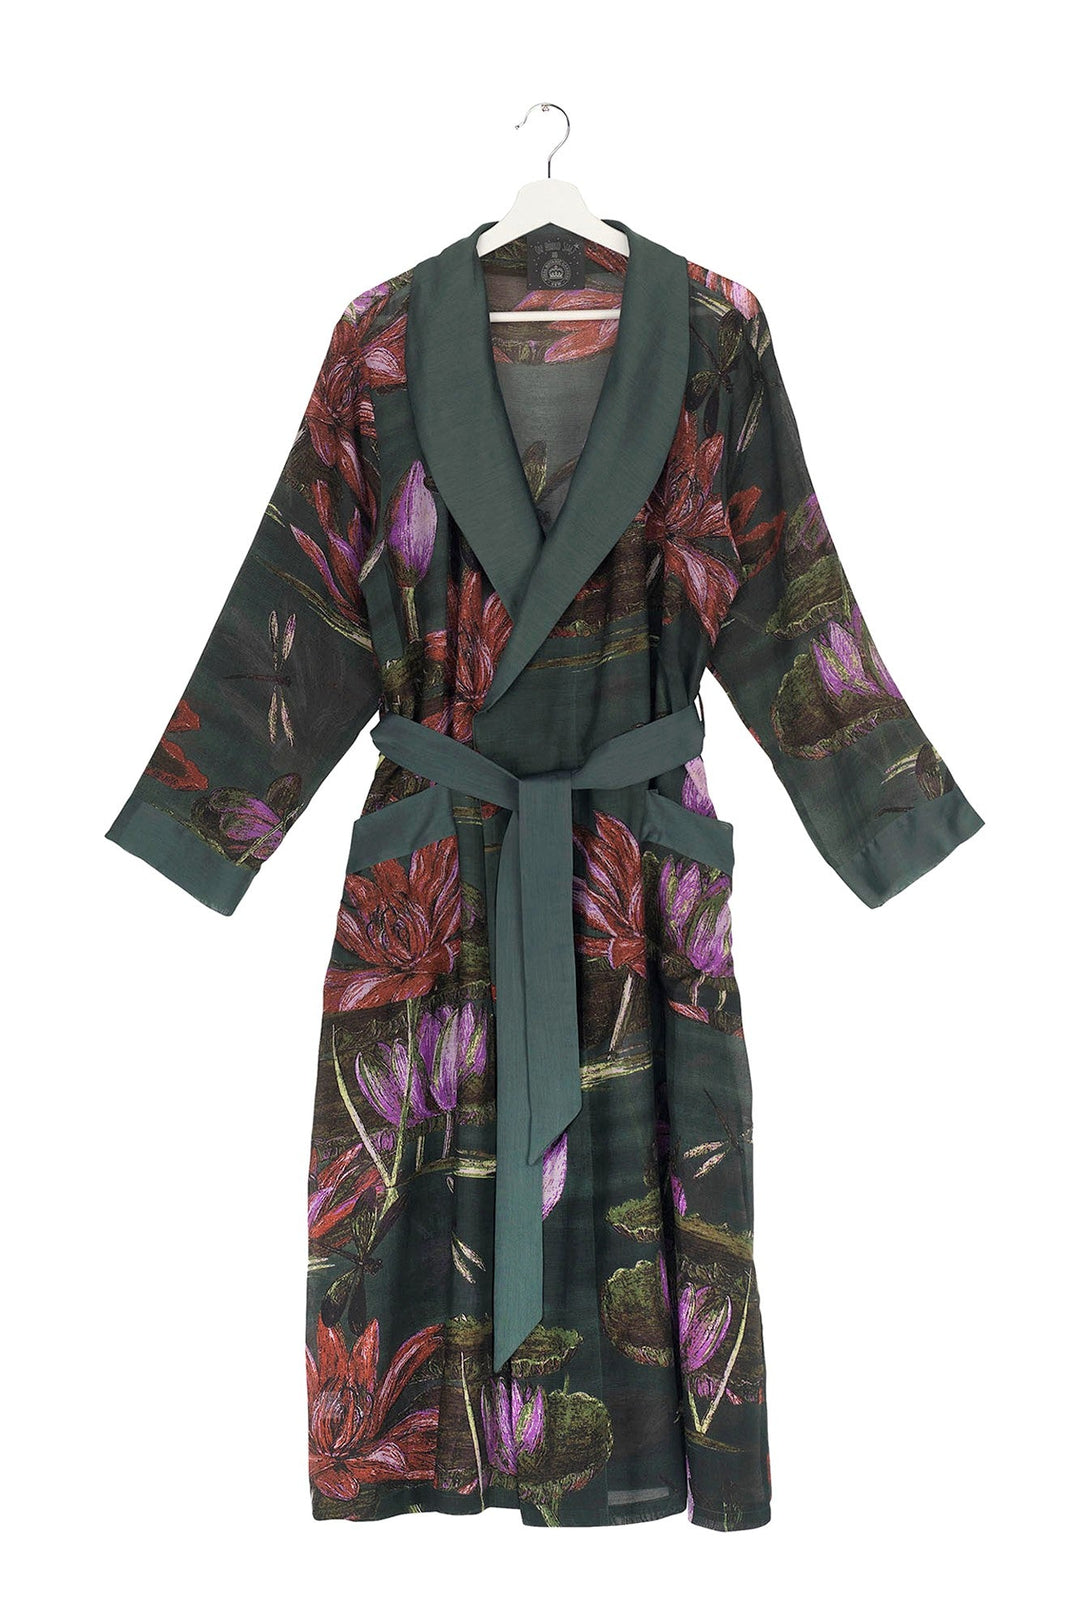 Marianne North Indian Lily Gown- This gown is perfect as a luxurious house coat or for layering as a chic accessory to your favourite outfit.